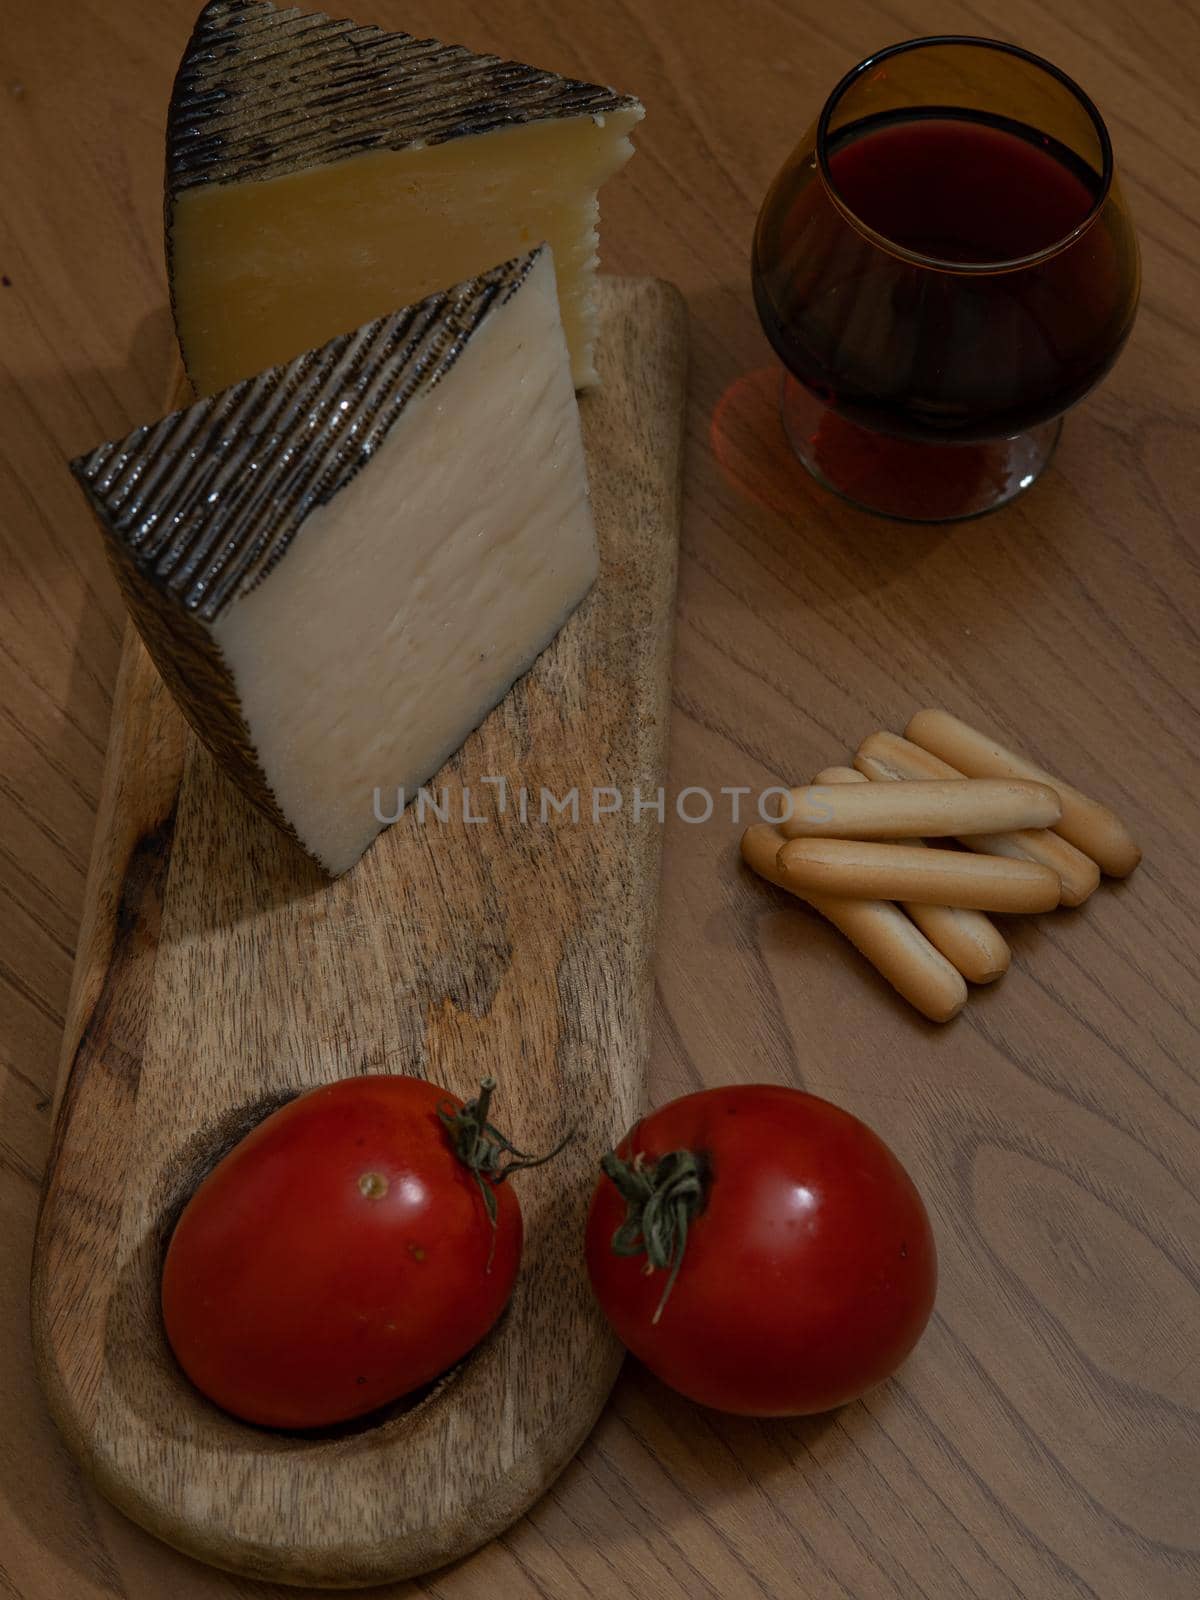 Cheese wedge with tomato and breadsticks on wooden board by xavier_photo